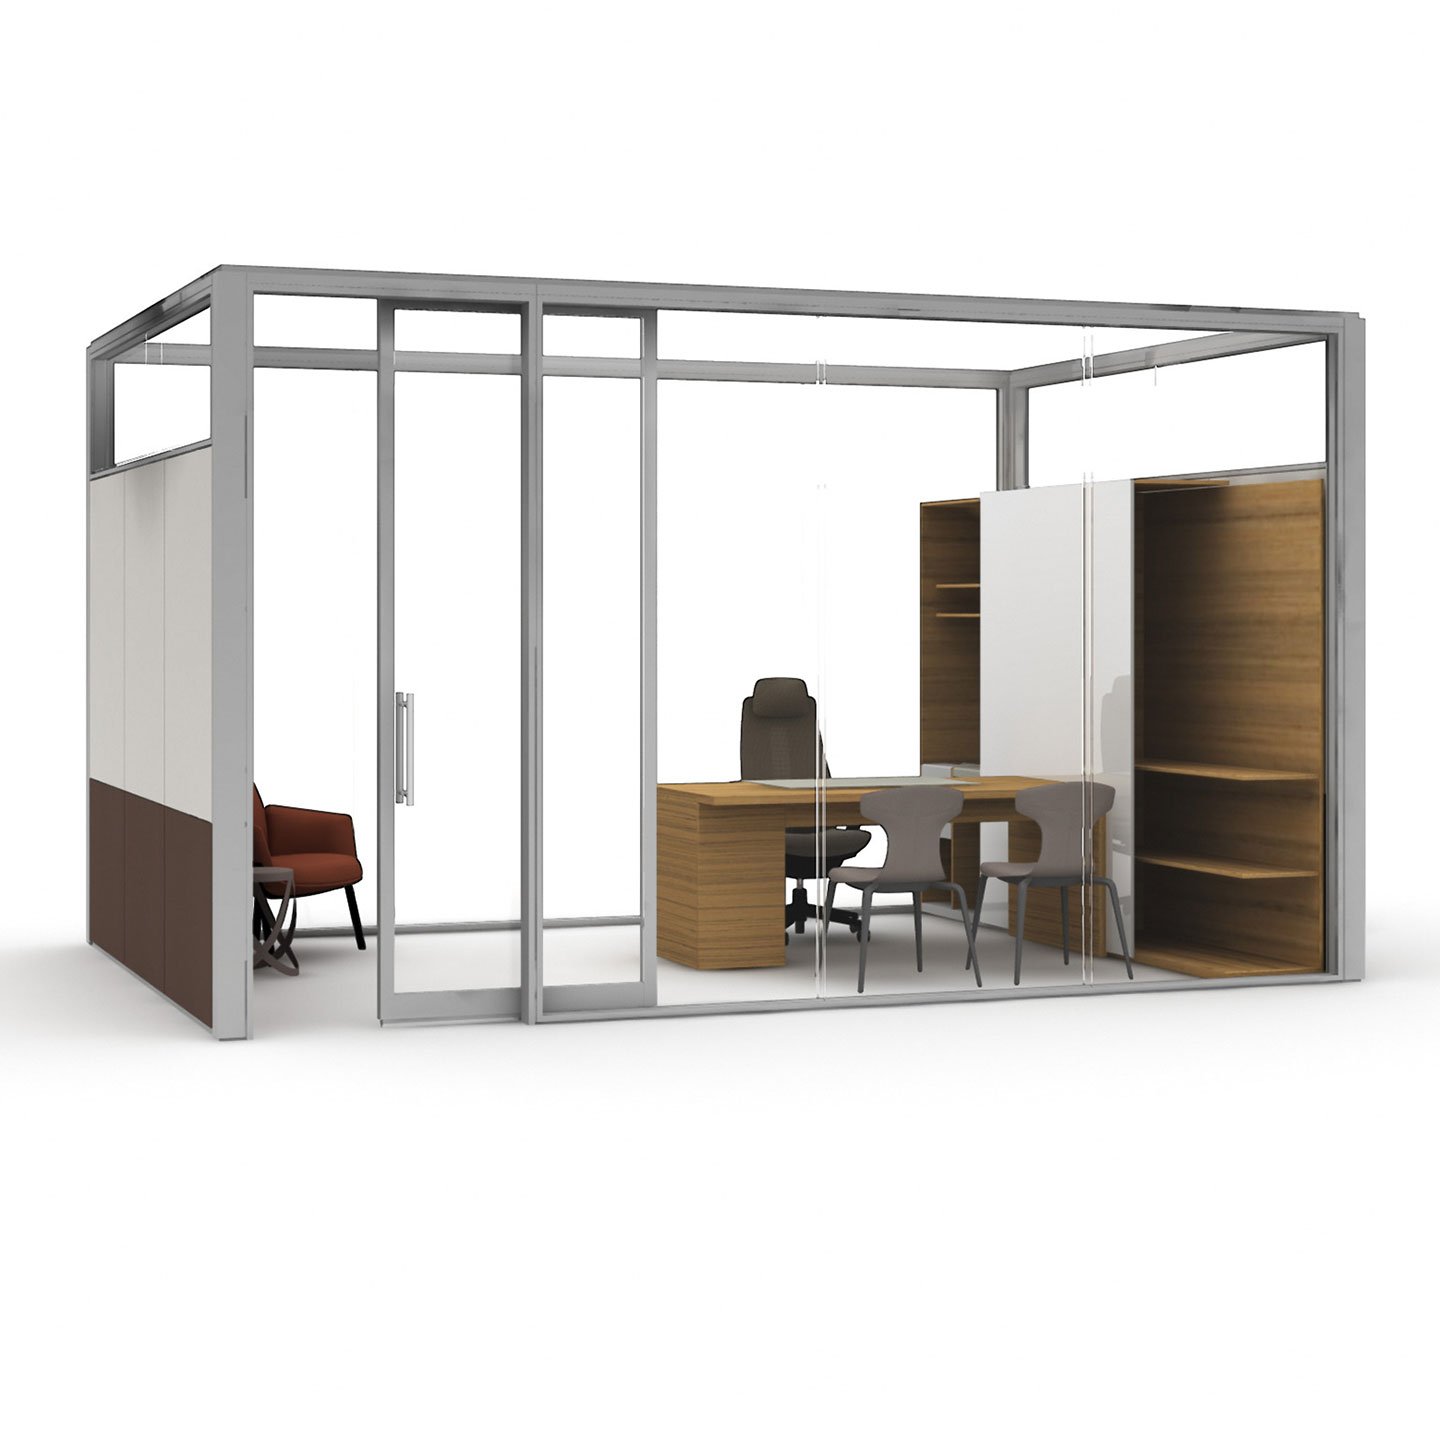 Haworth Enclose Frameless Glass 2 Wall mock up private office space with desk and chairs with wood storage 